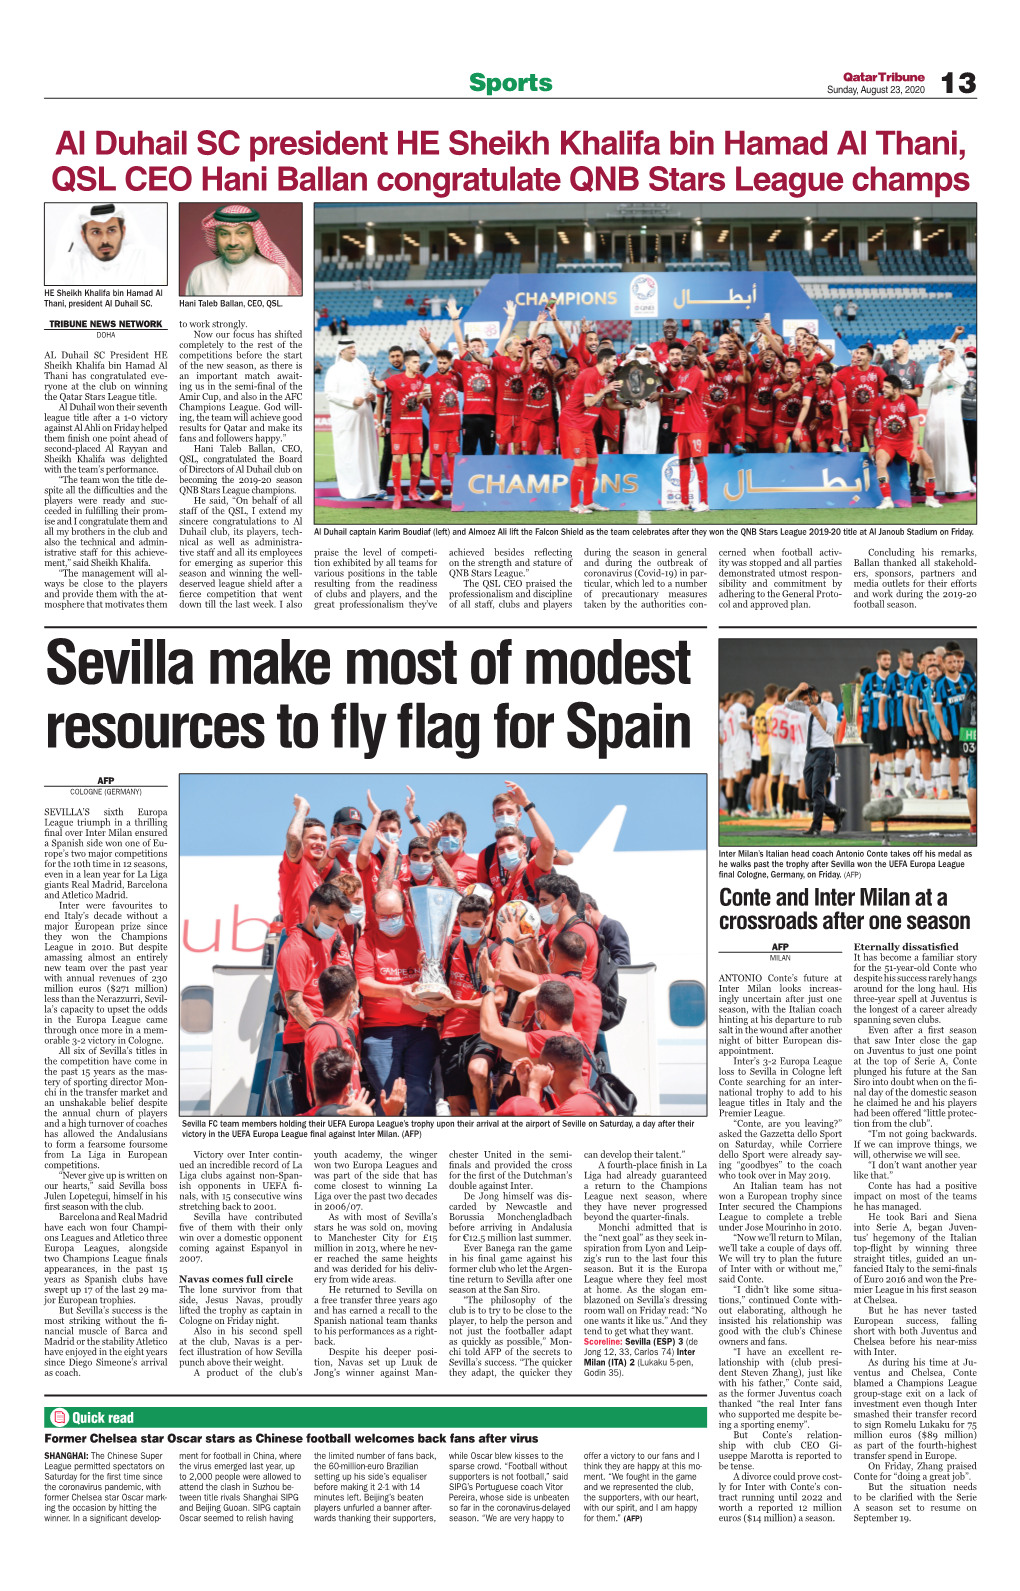 Sevilla Make Most of Modest Resources to Fly Flag for Spain